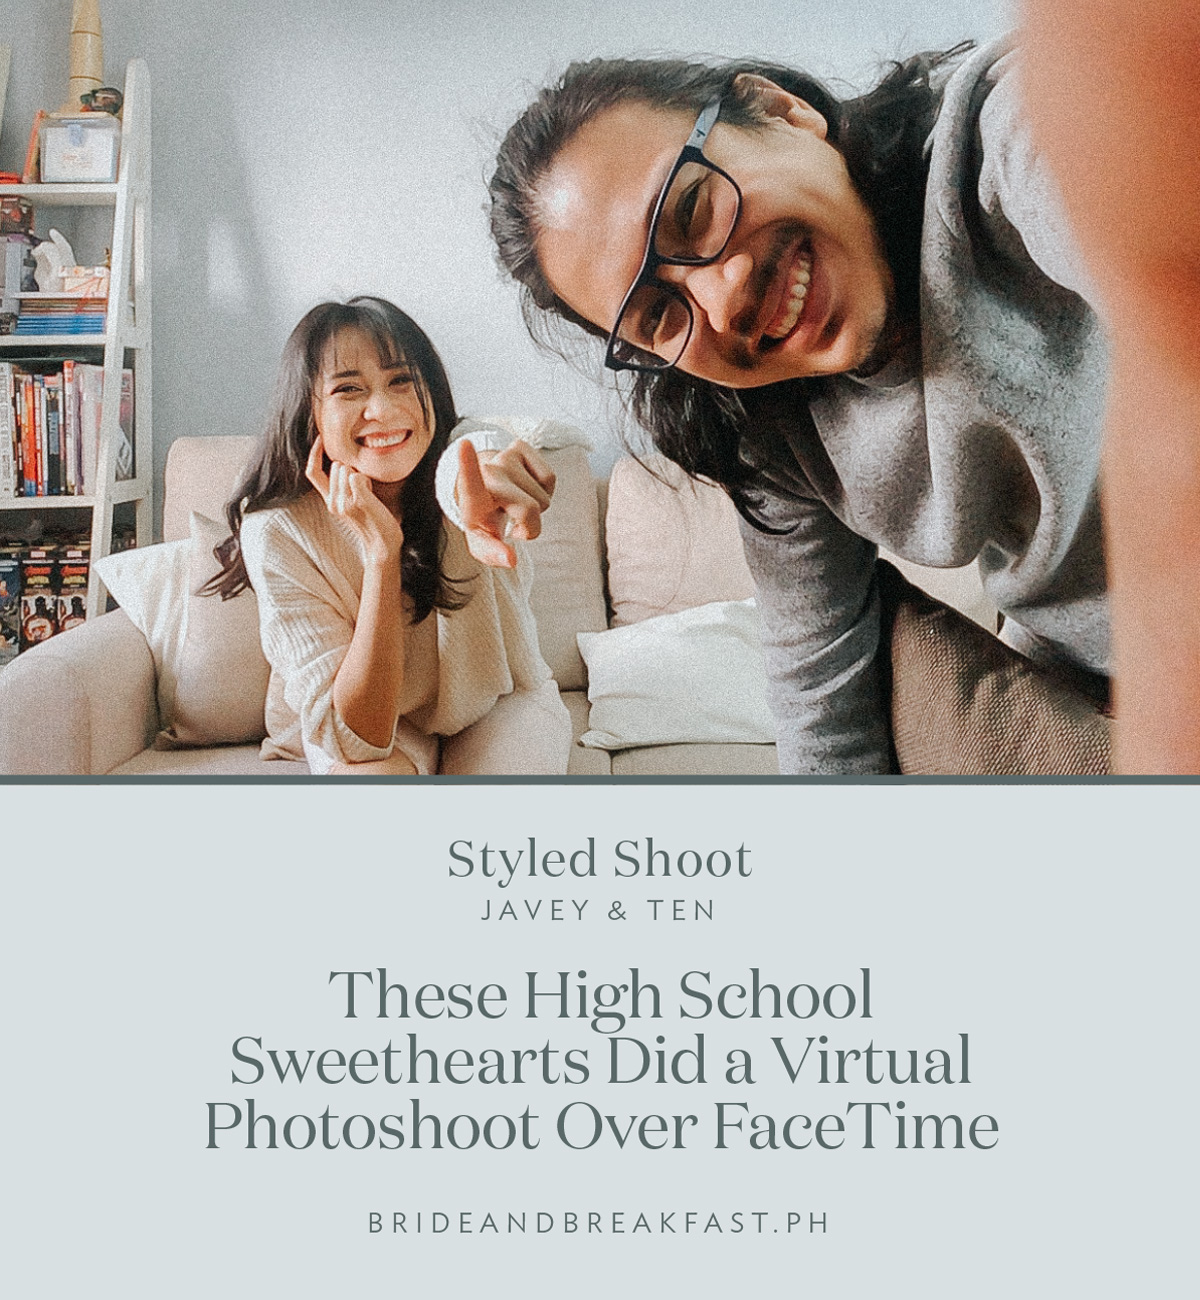 These High School Sweethearts Did a Virtual Photoshoot Over FaceTime